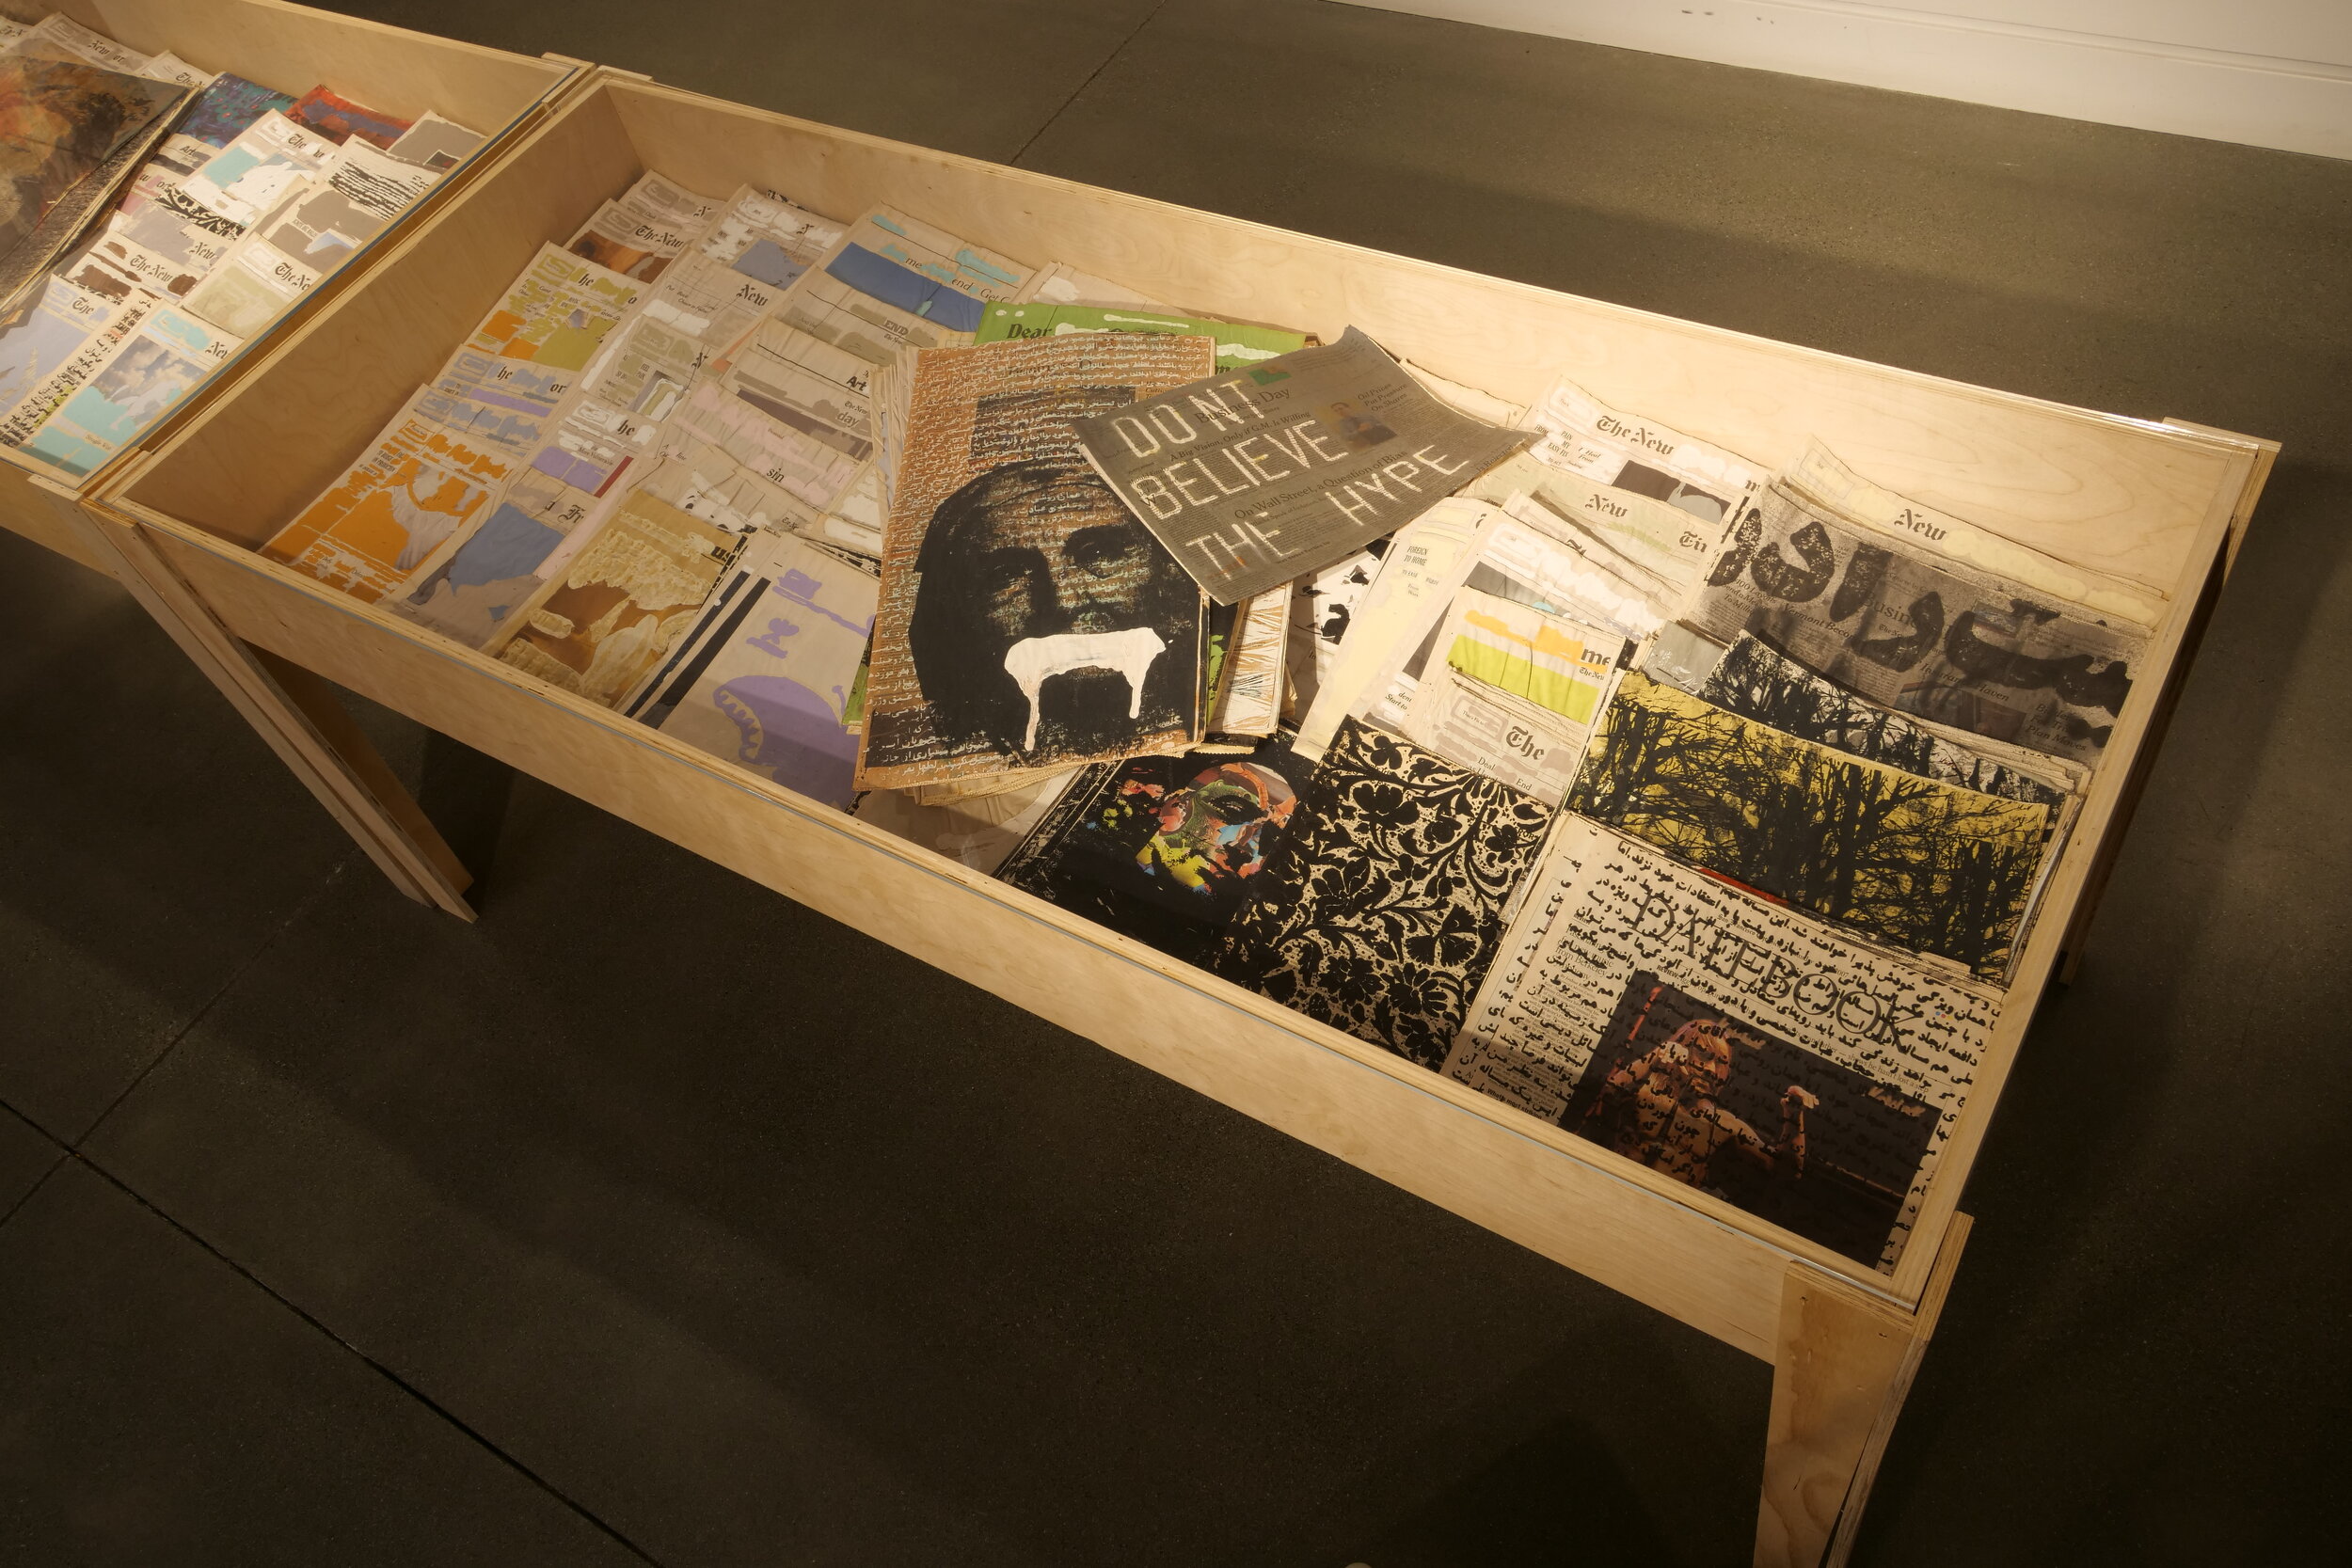 Display table featuring redacted magazines and media. (Copy)